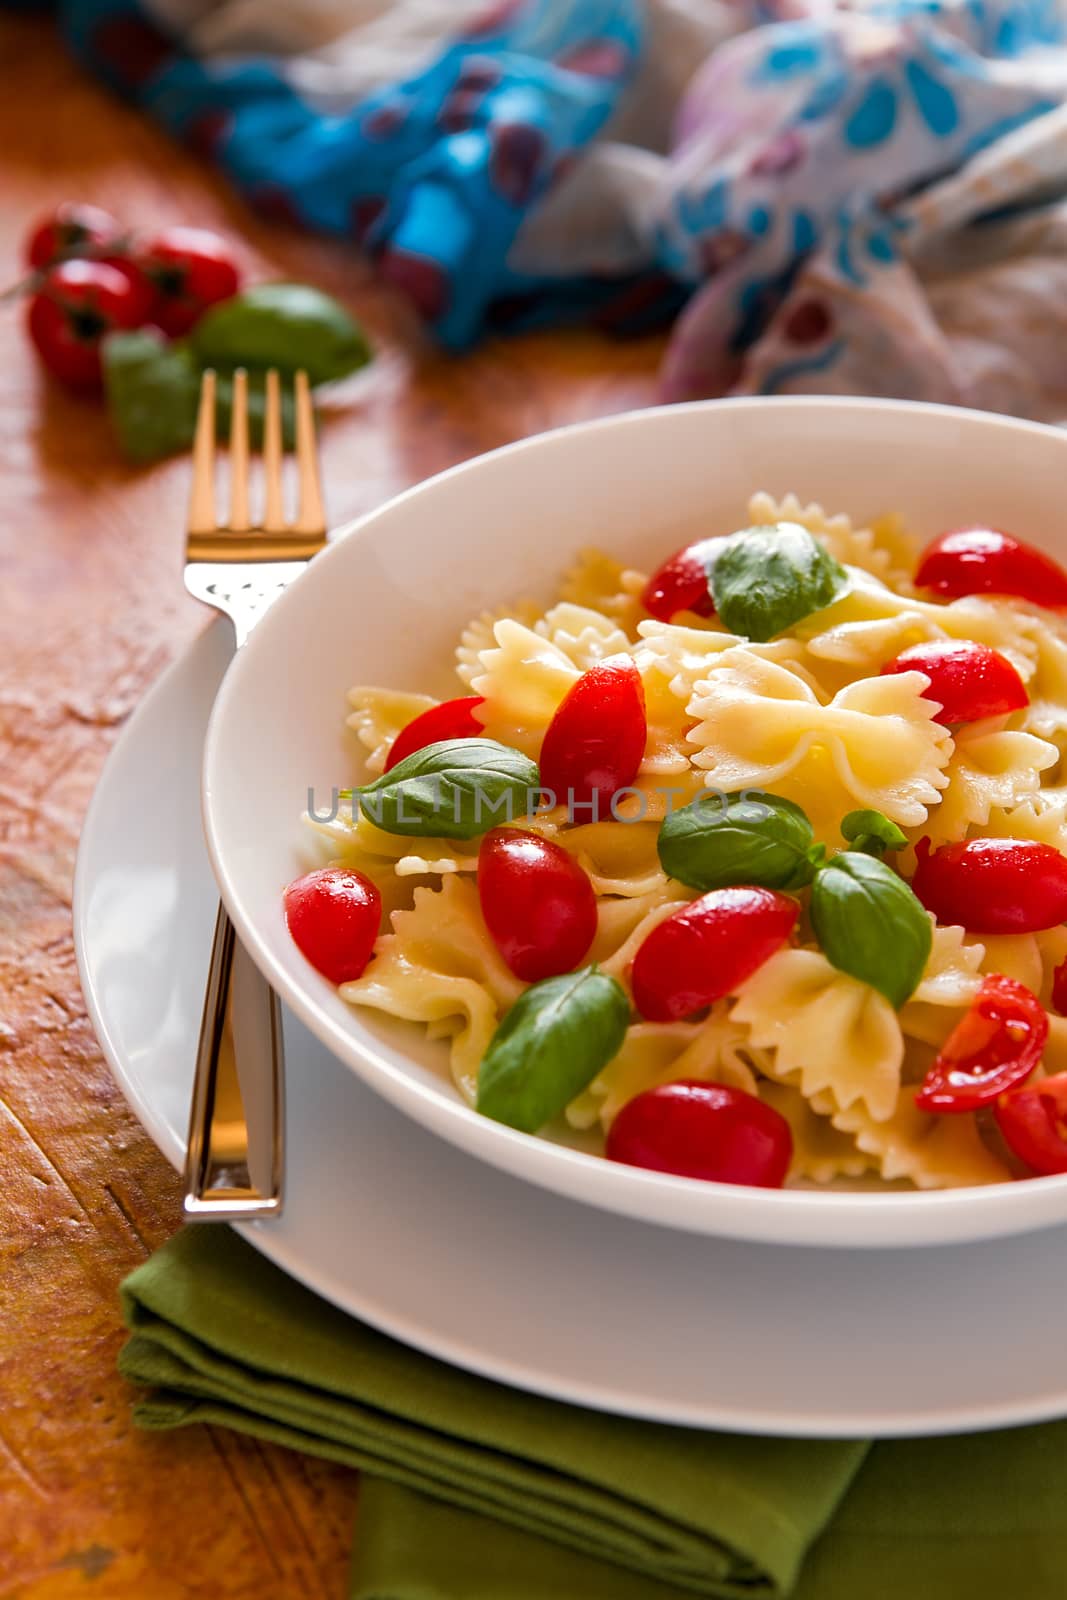 Farfalle pasta with cherry tomatoes and basil over a green napkin